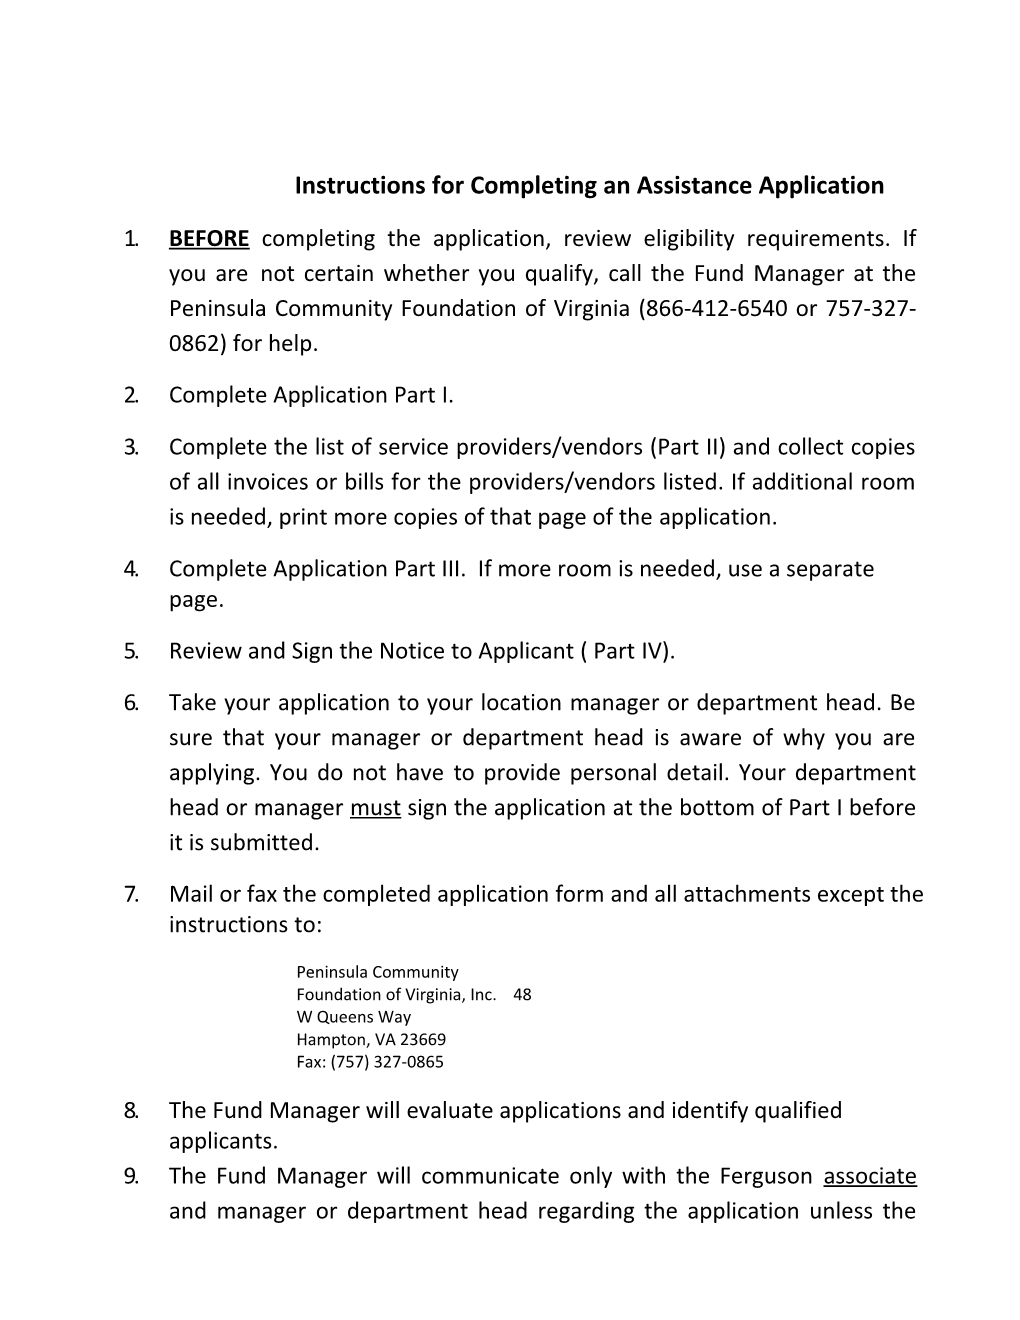 Instructions for Completing an Assistance Application